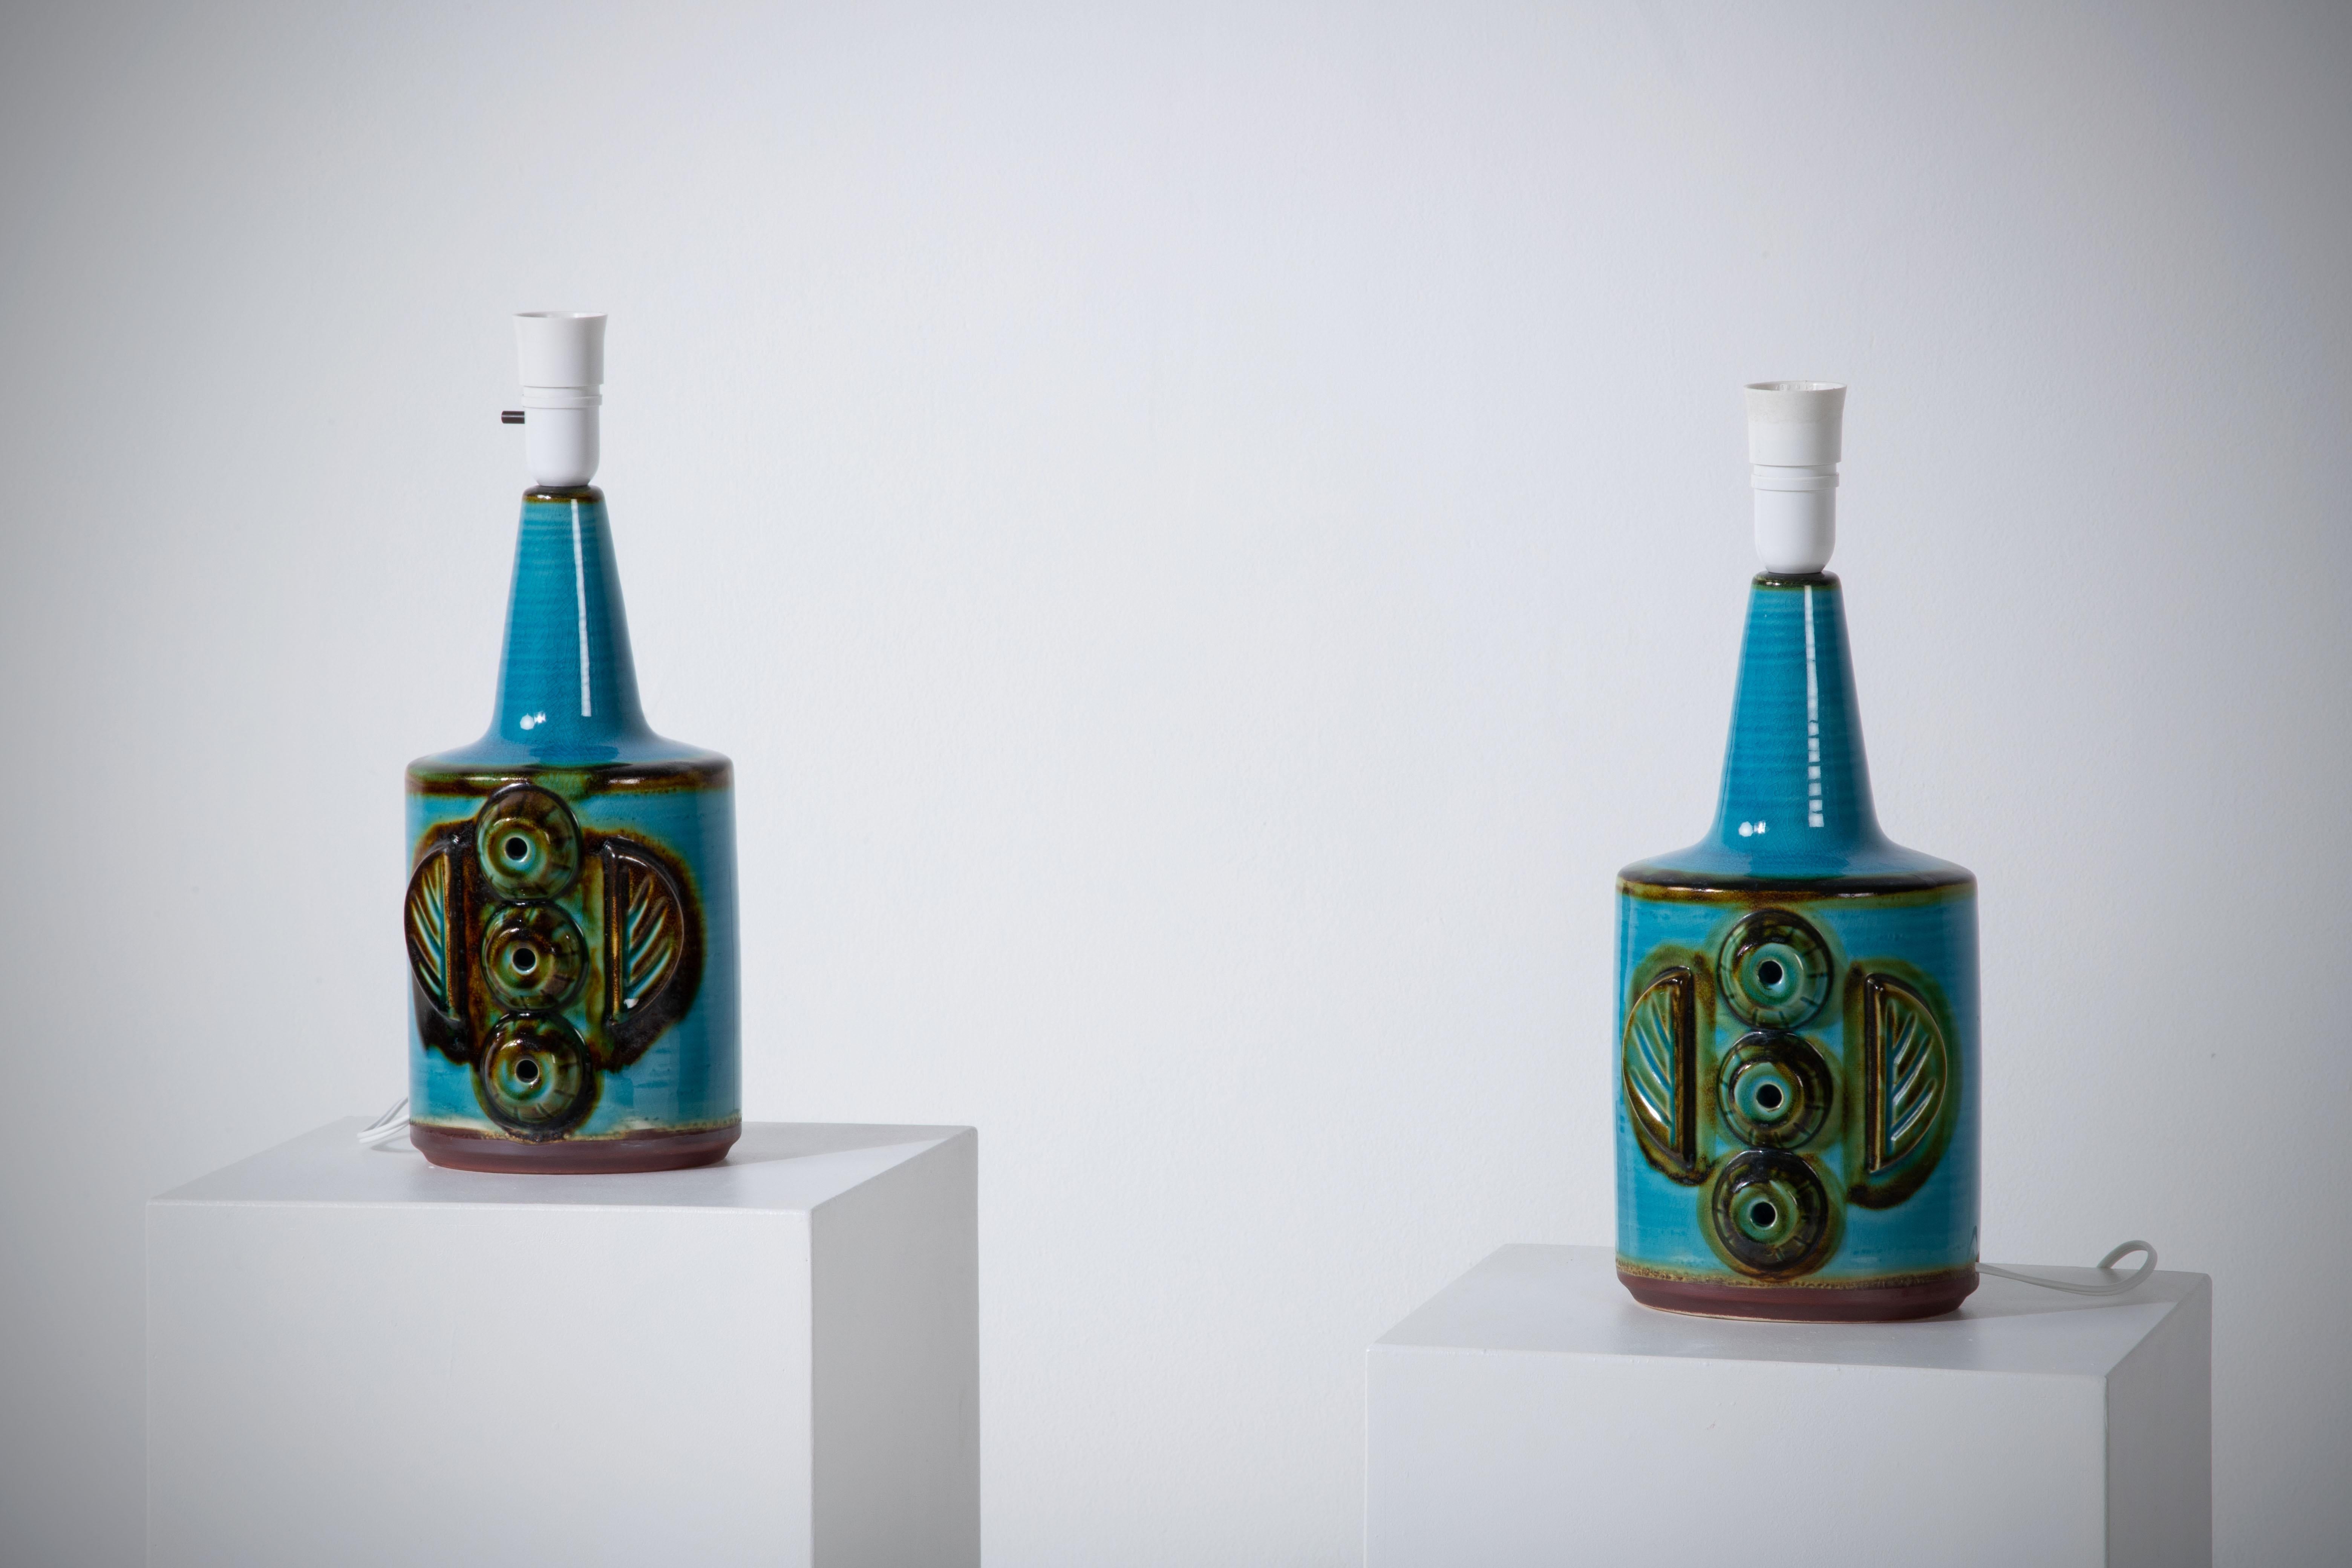 Pair of Turquoise Søholm Table Lamps by Einar Johansen, Denmark, 1960s For Sale 5